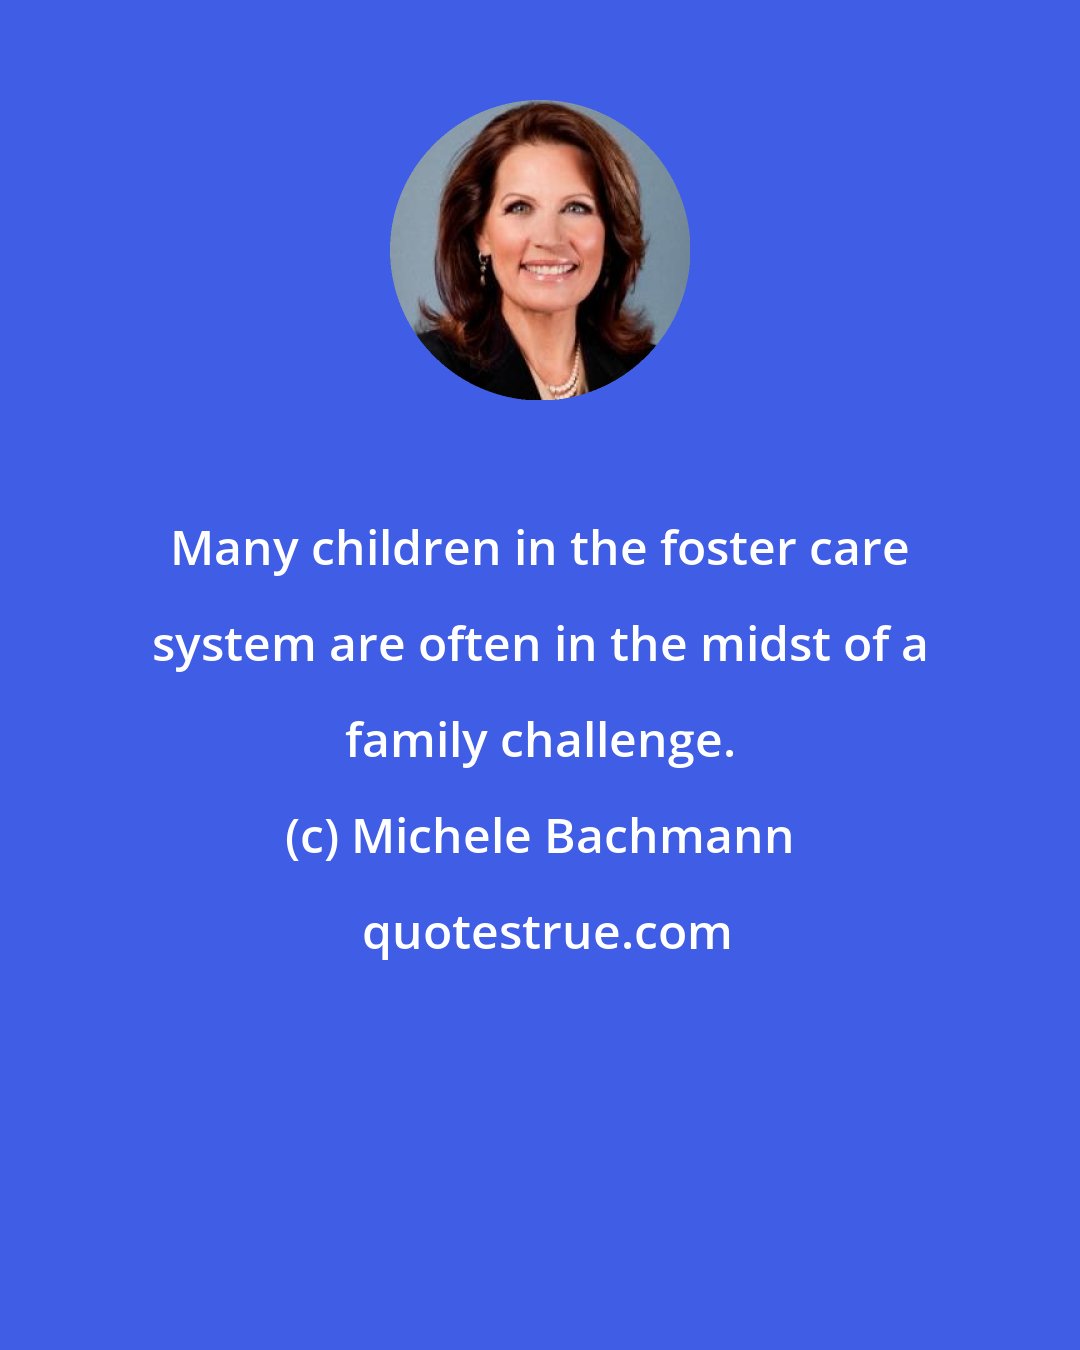 Michele Bachmann: Many children in the foster care system are often in the midst of a family challenge.